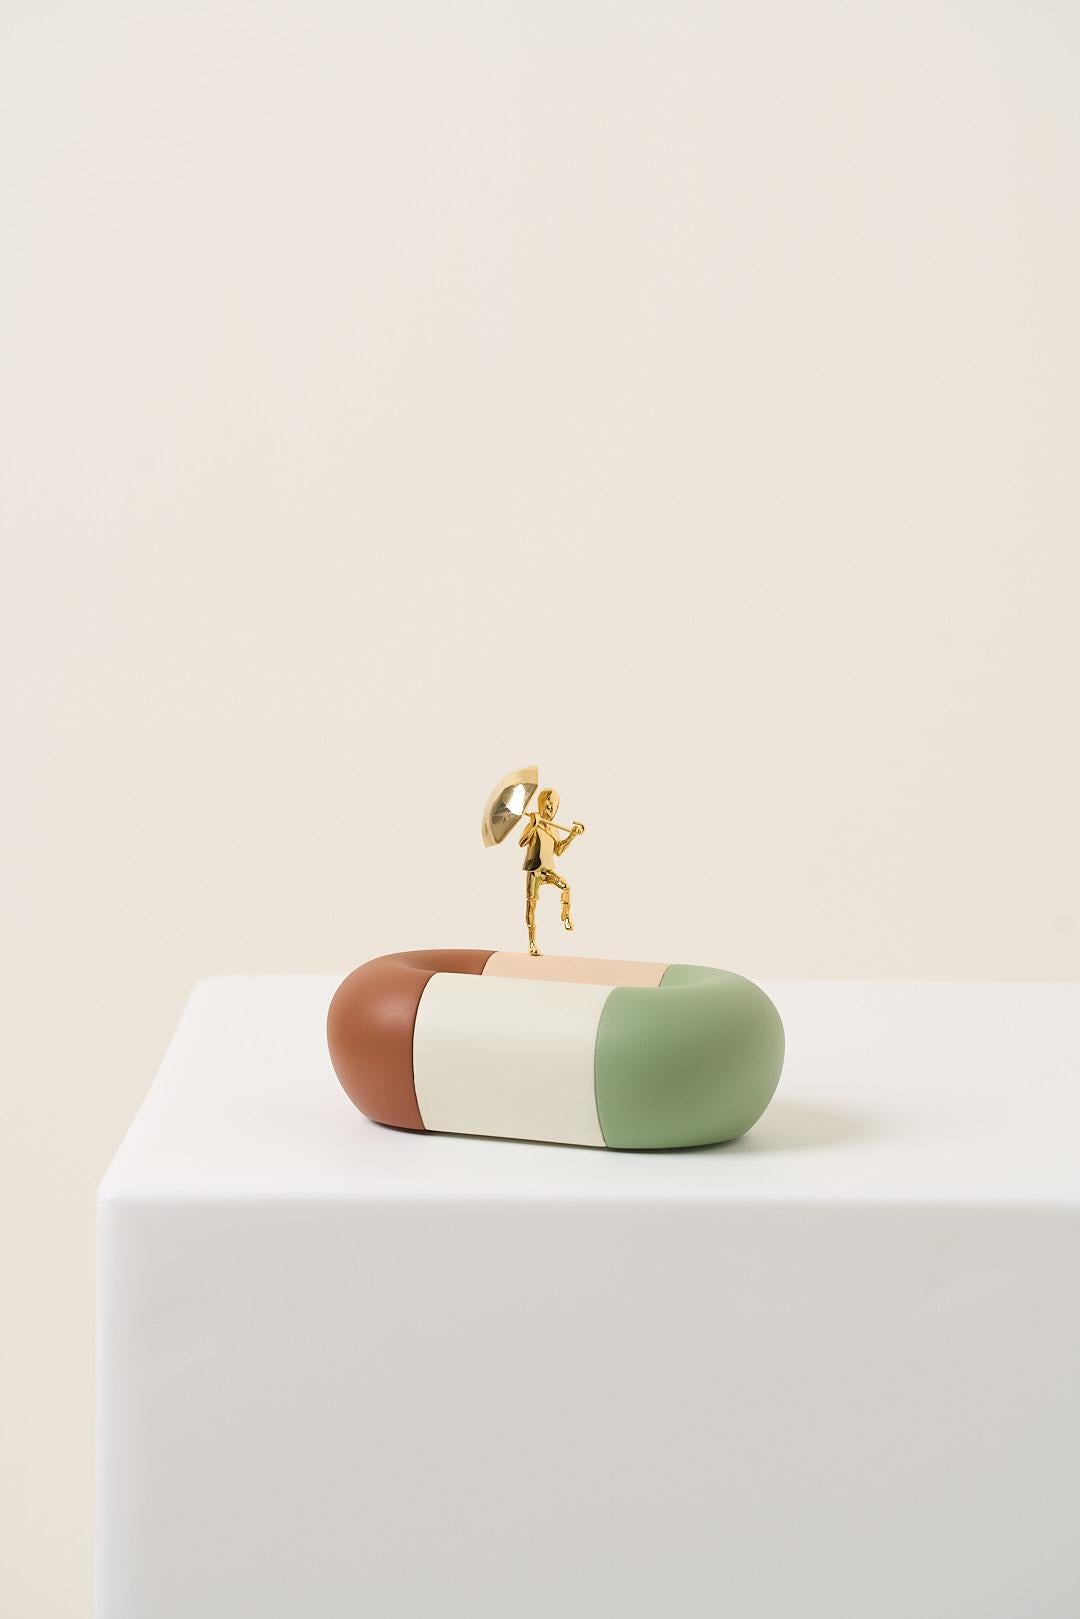 SCULPTURE SERIES IDÍLIO

“Because the really serious questions are only those a child can ask. Only the most naive questions are really serious questions.”
Milan Kundera


The ciranda sung in a circle, the games of tag and the toys kept in the